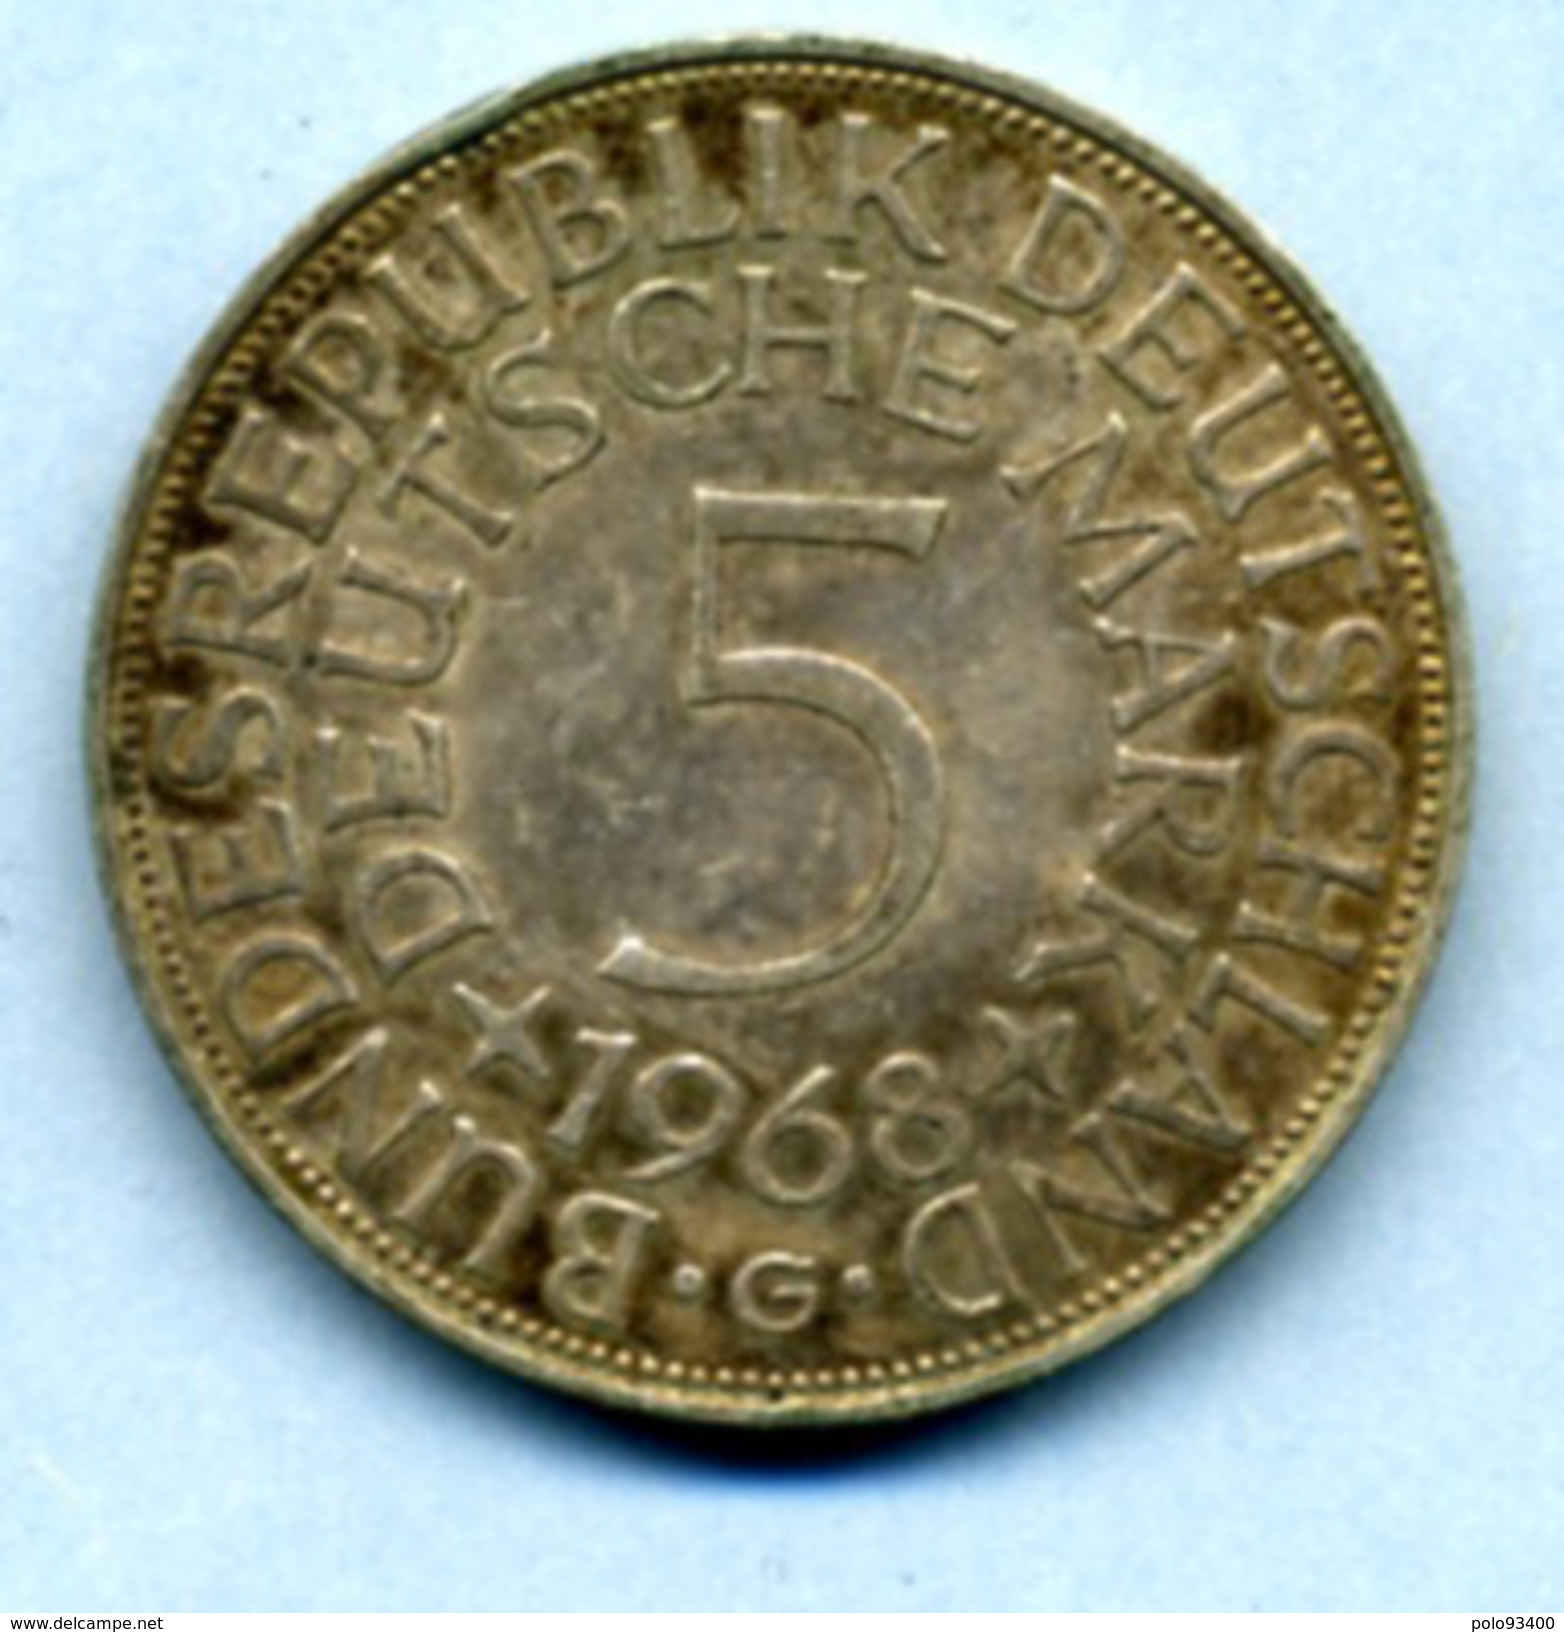 1968 G 5 MARKS SILVER - 5 Marchi